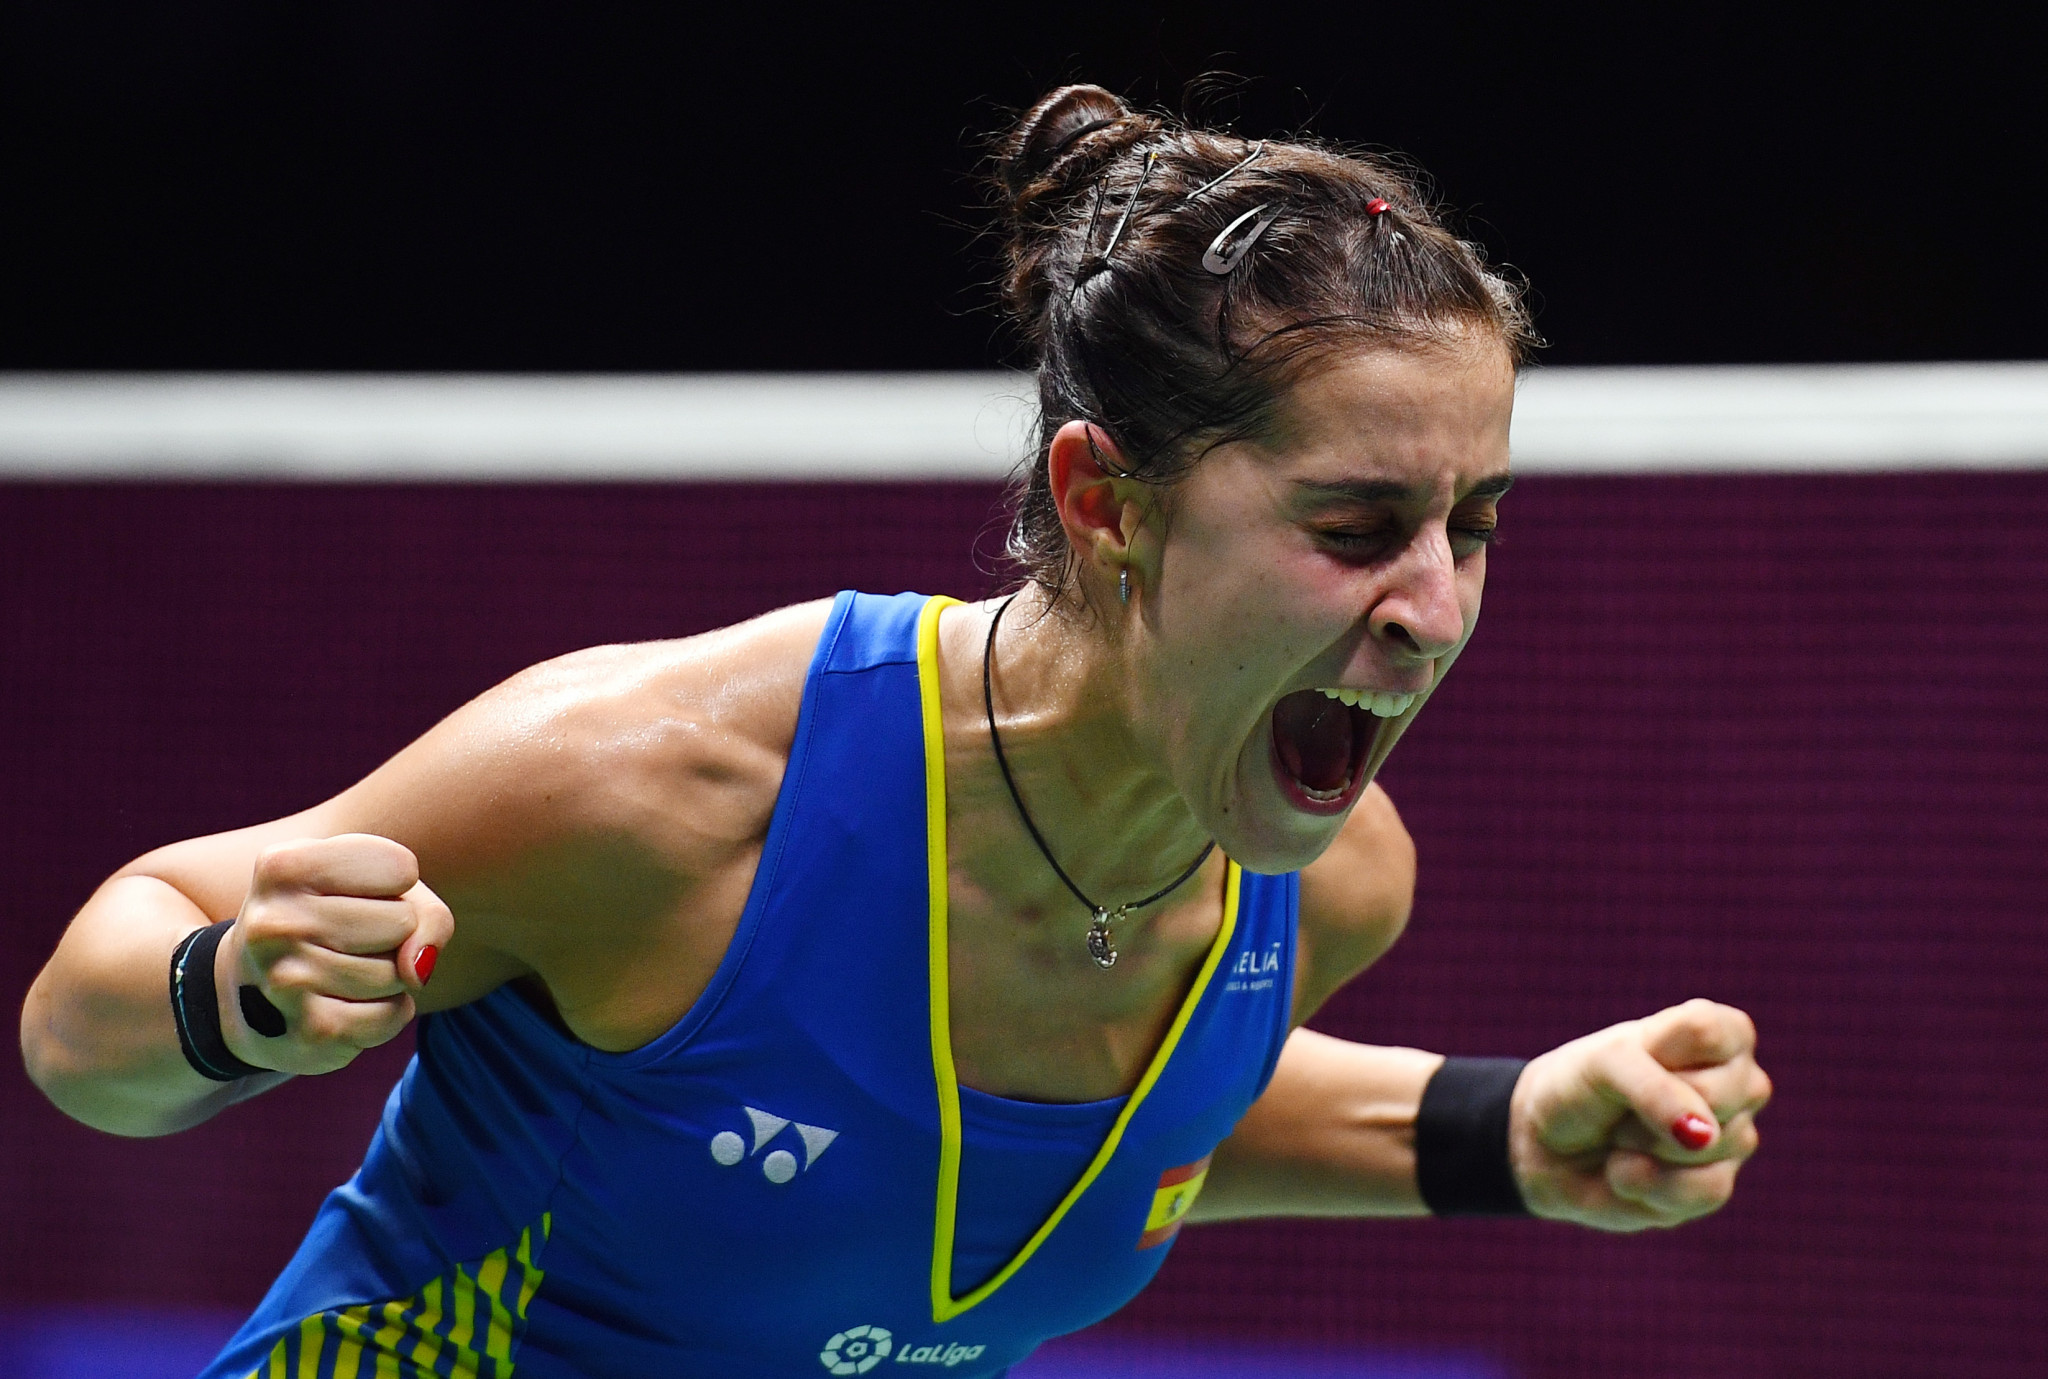 The women's world champion Carolina Marin is also among the entries ©Getty Images